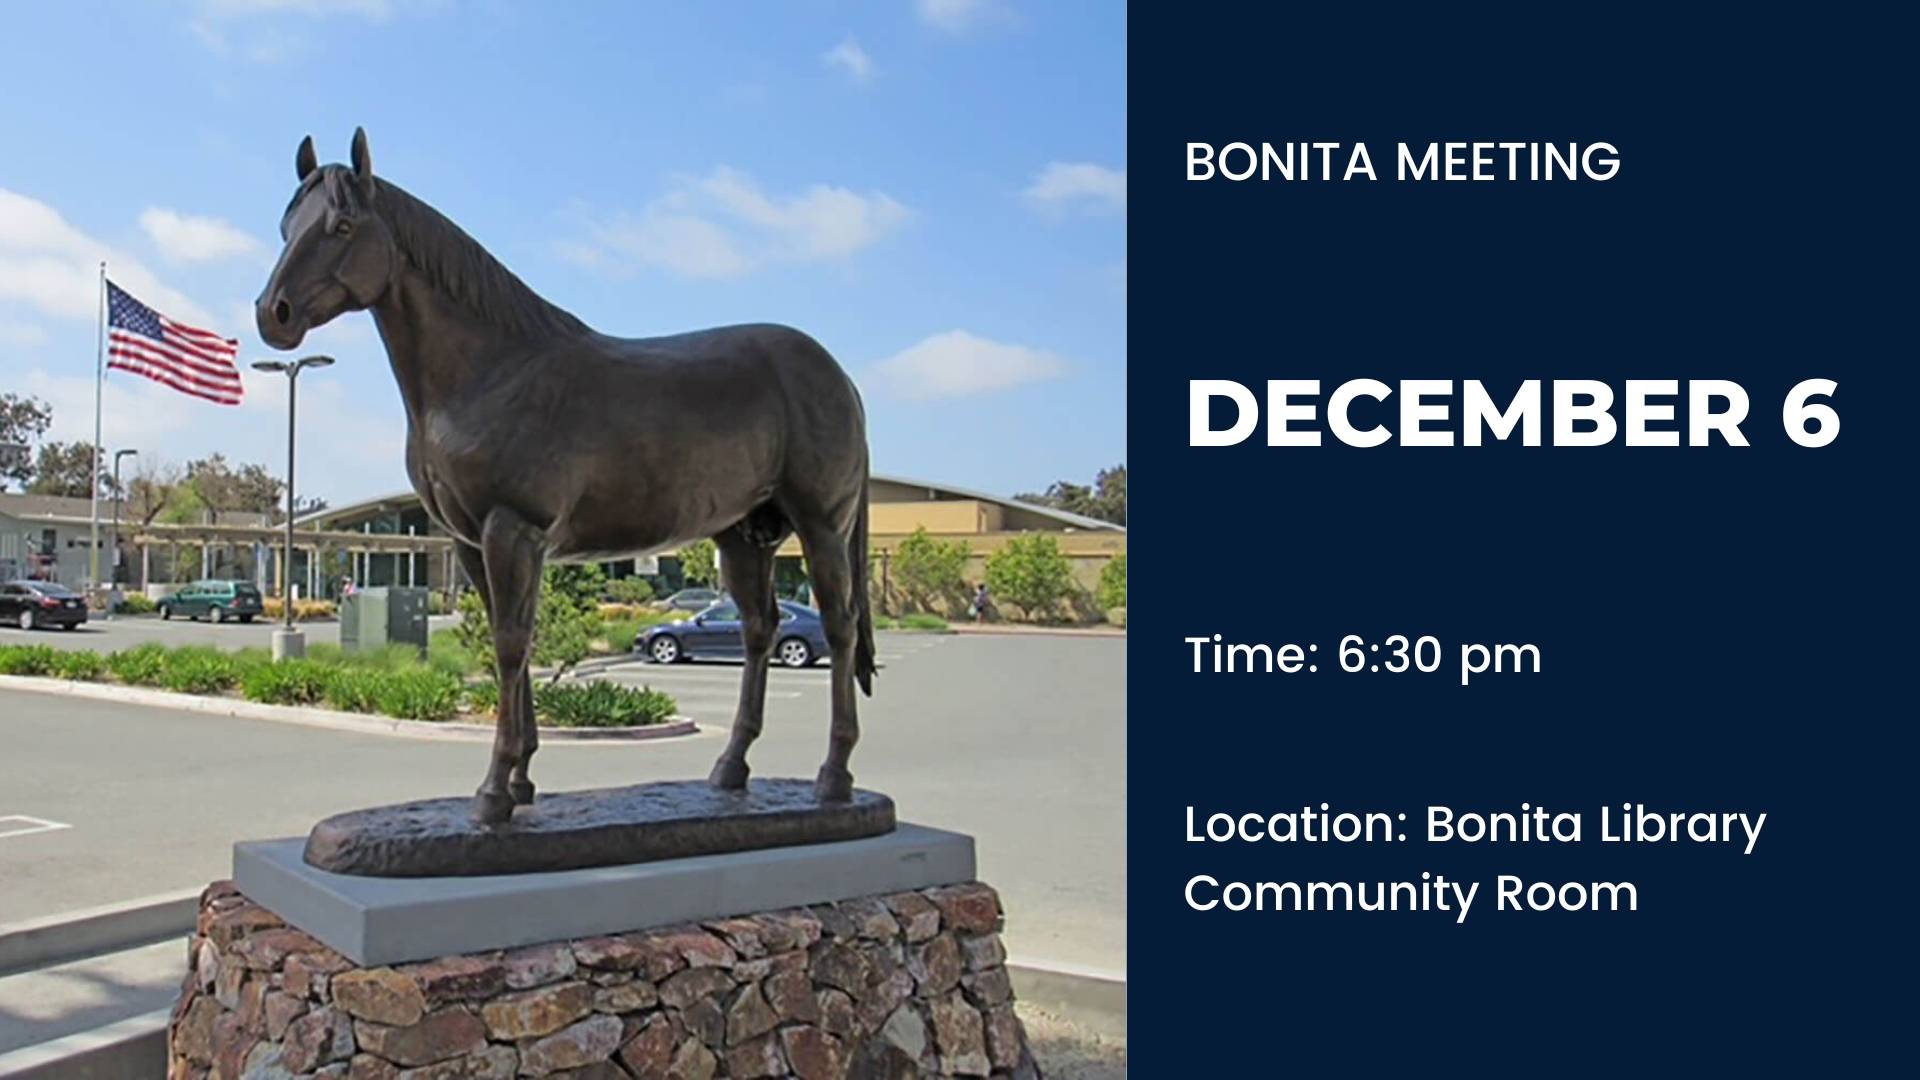 Please join the SVCA for their upcoming December 6th meeting to discuss news and important information on community topics. Read more.